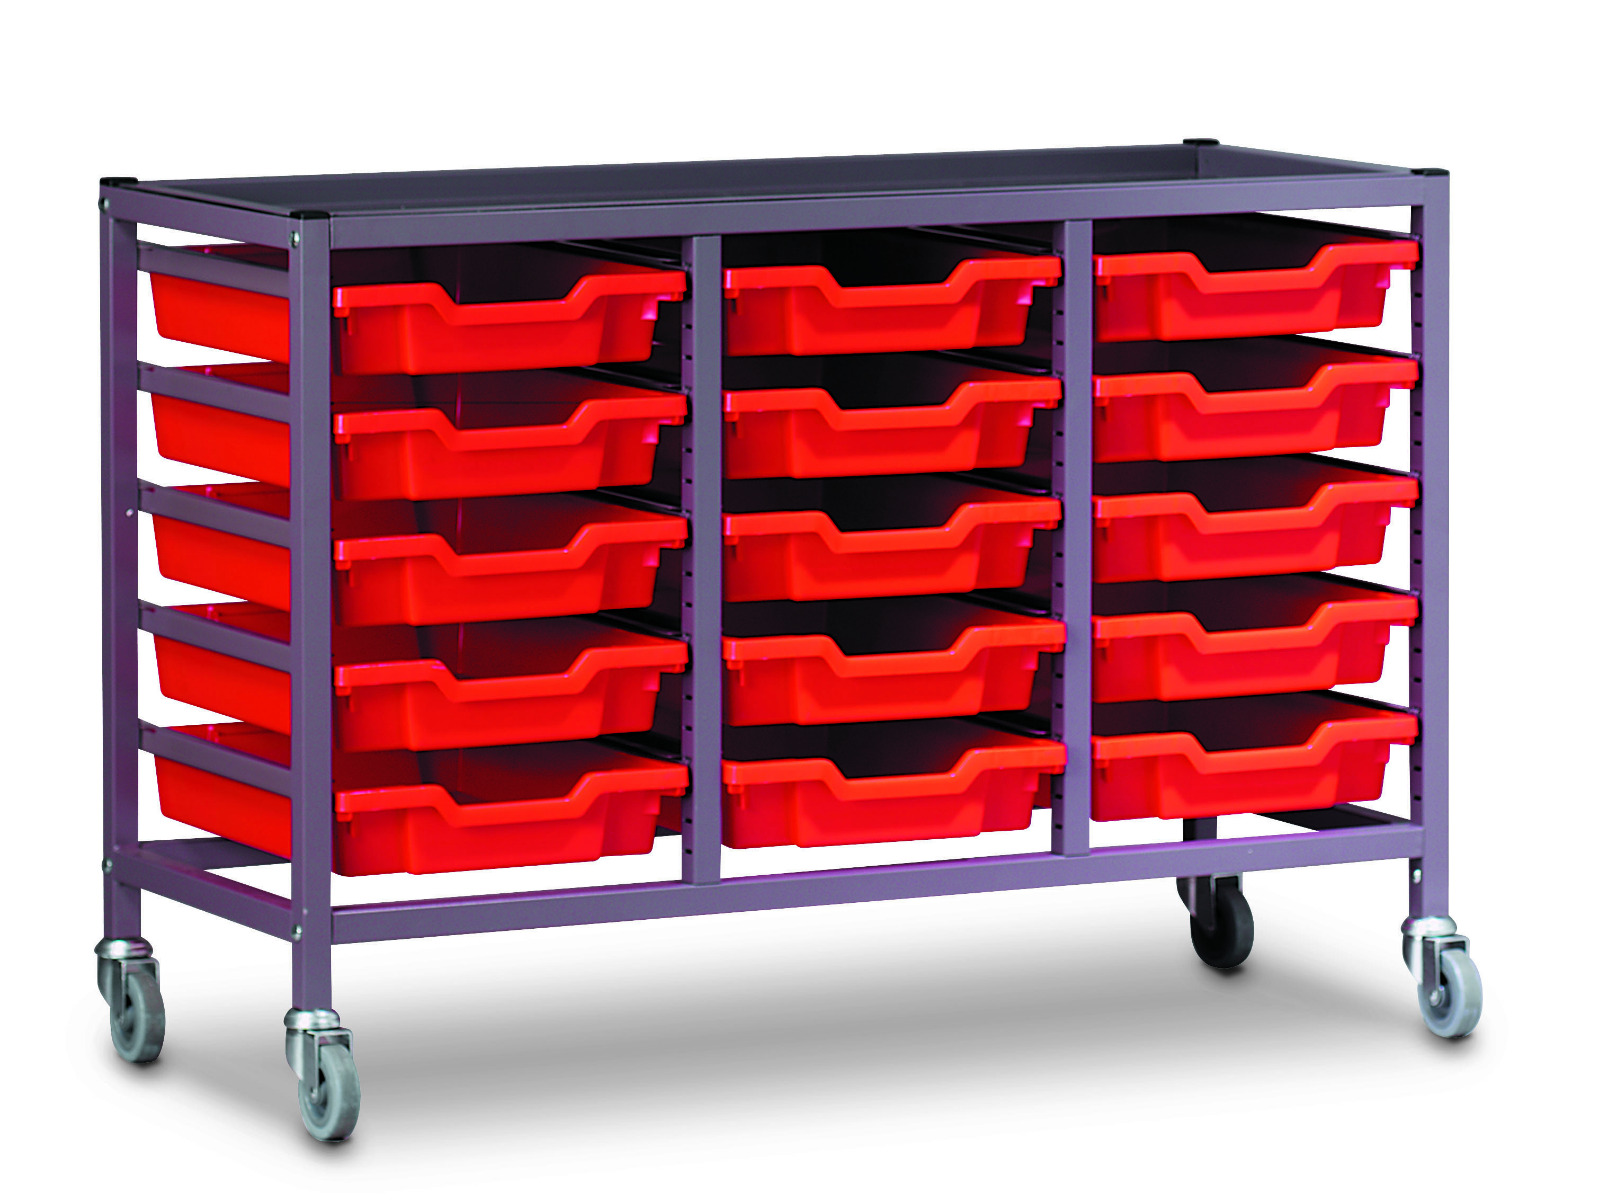 TecniStor Mobile 15 Tray Trolley